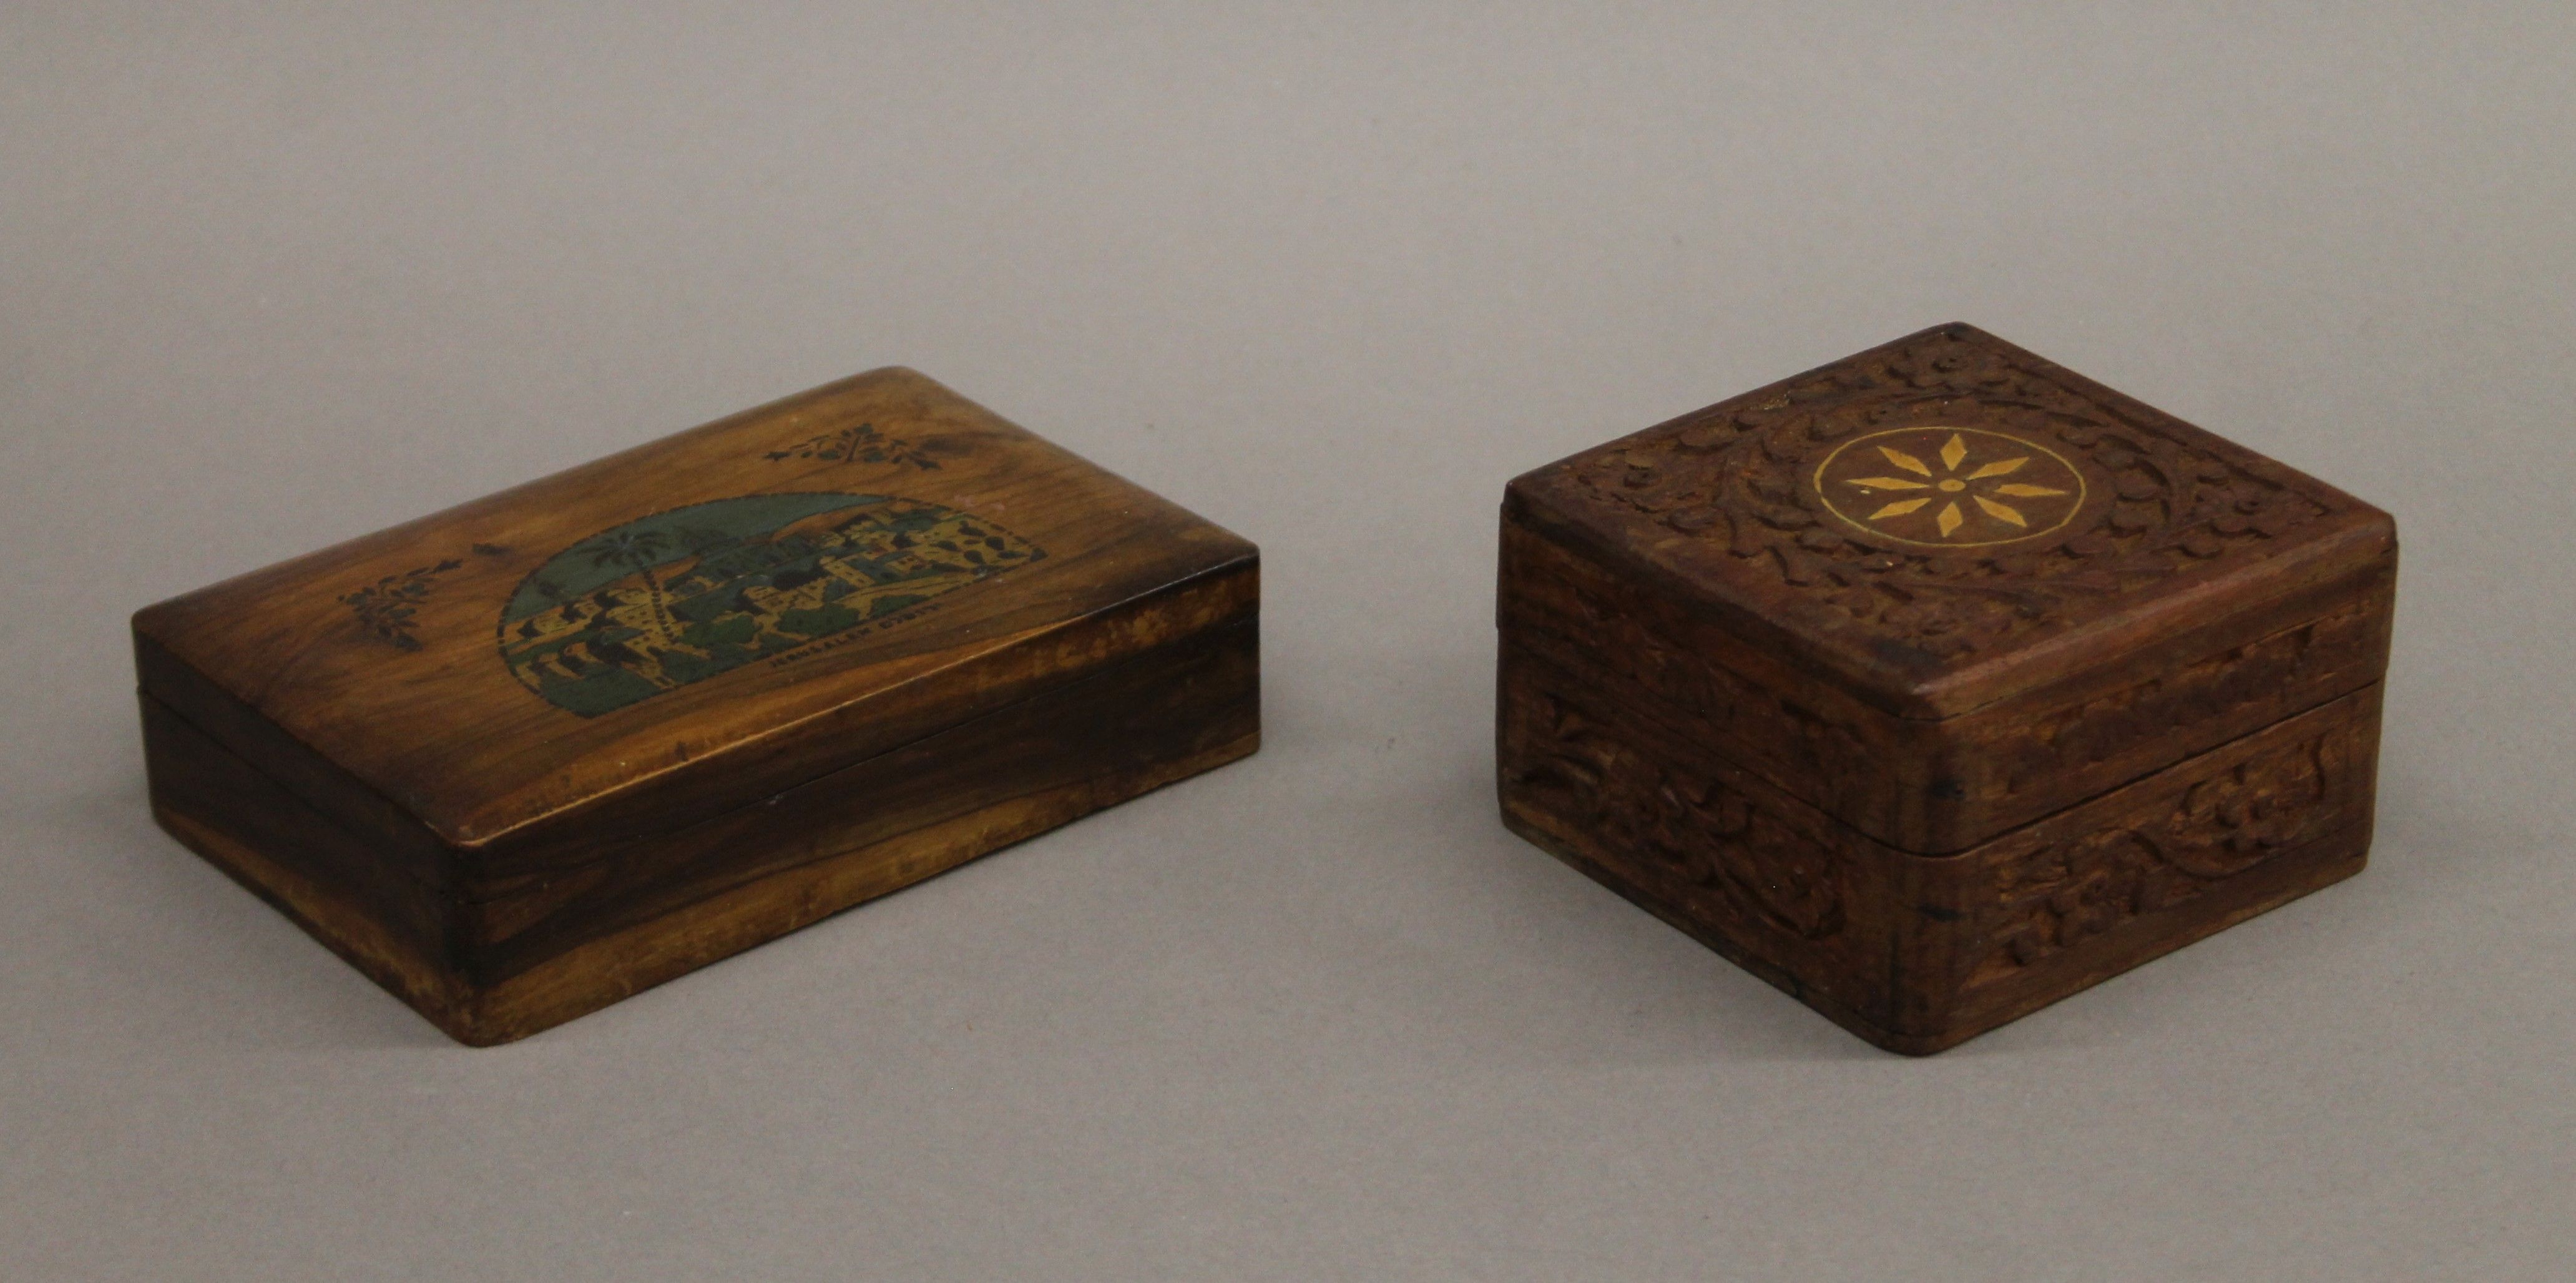 A quantity of various vintage wooden boxes, tins, etc. - Image 3 of 8